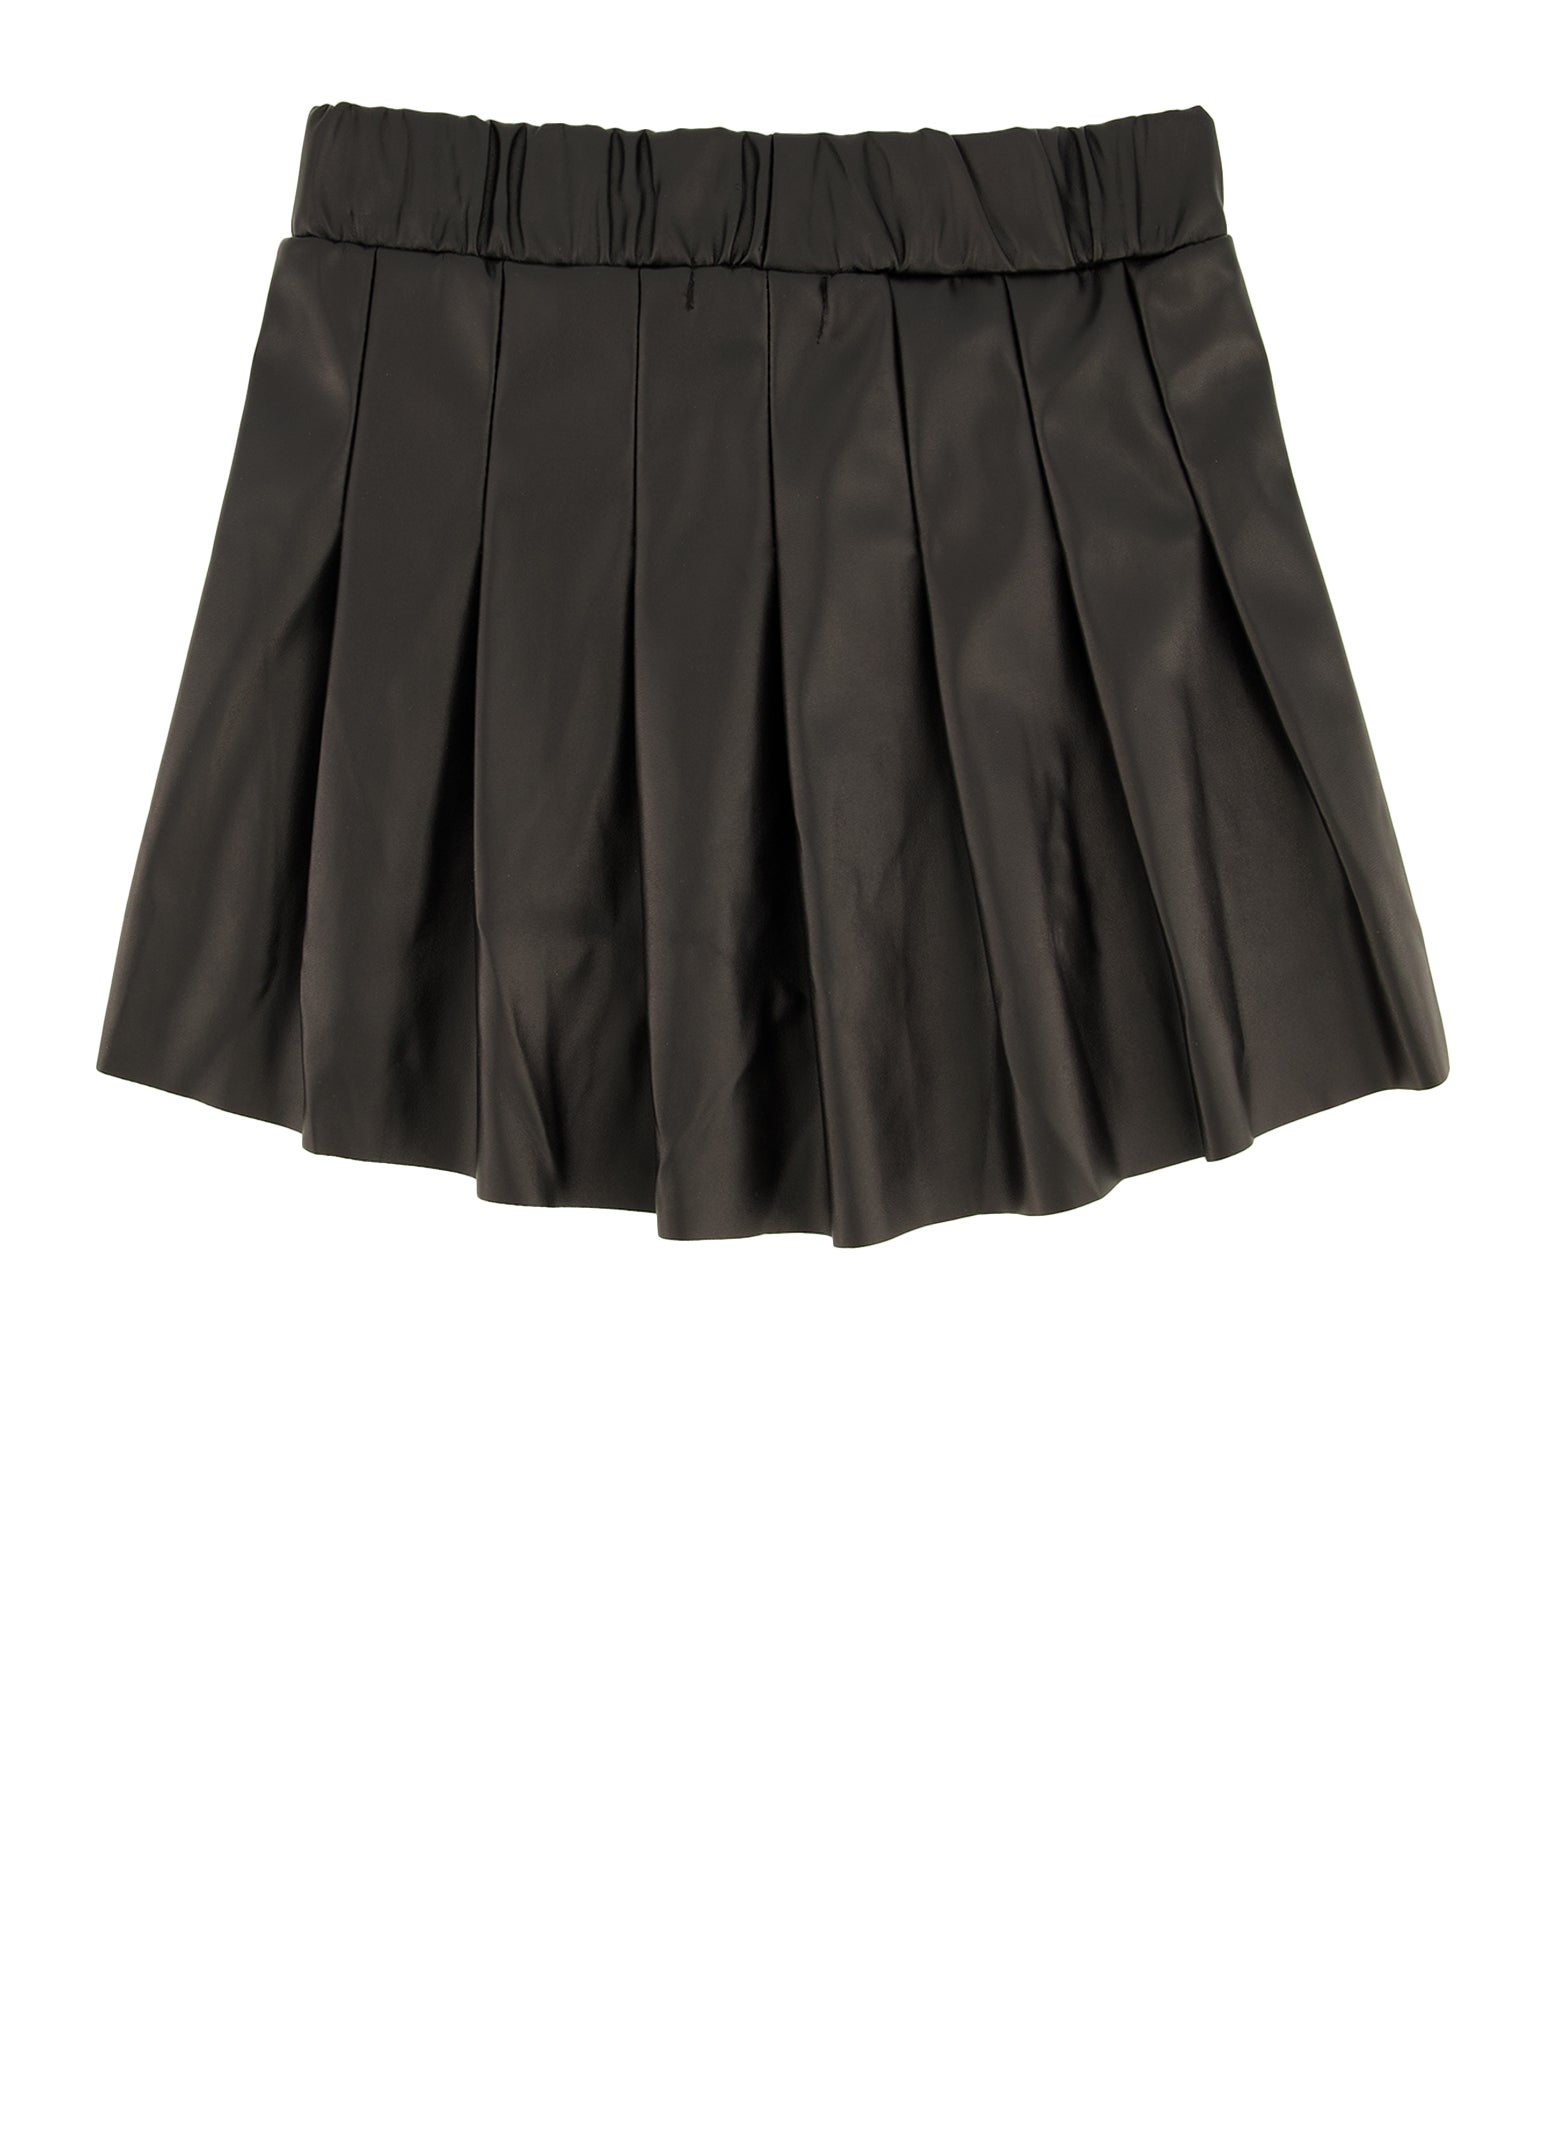 Toddler Girls Faux Leather Pleated Skirt